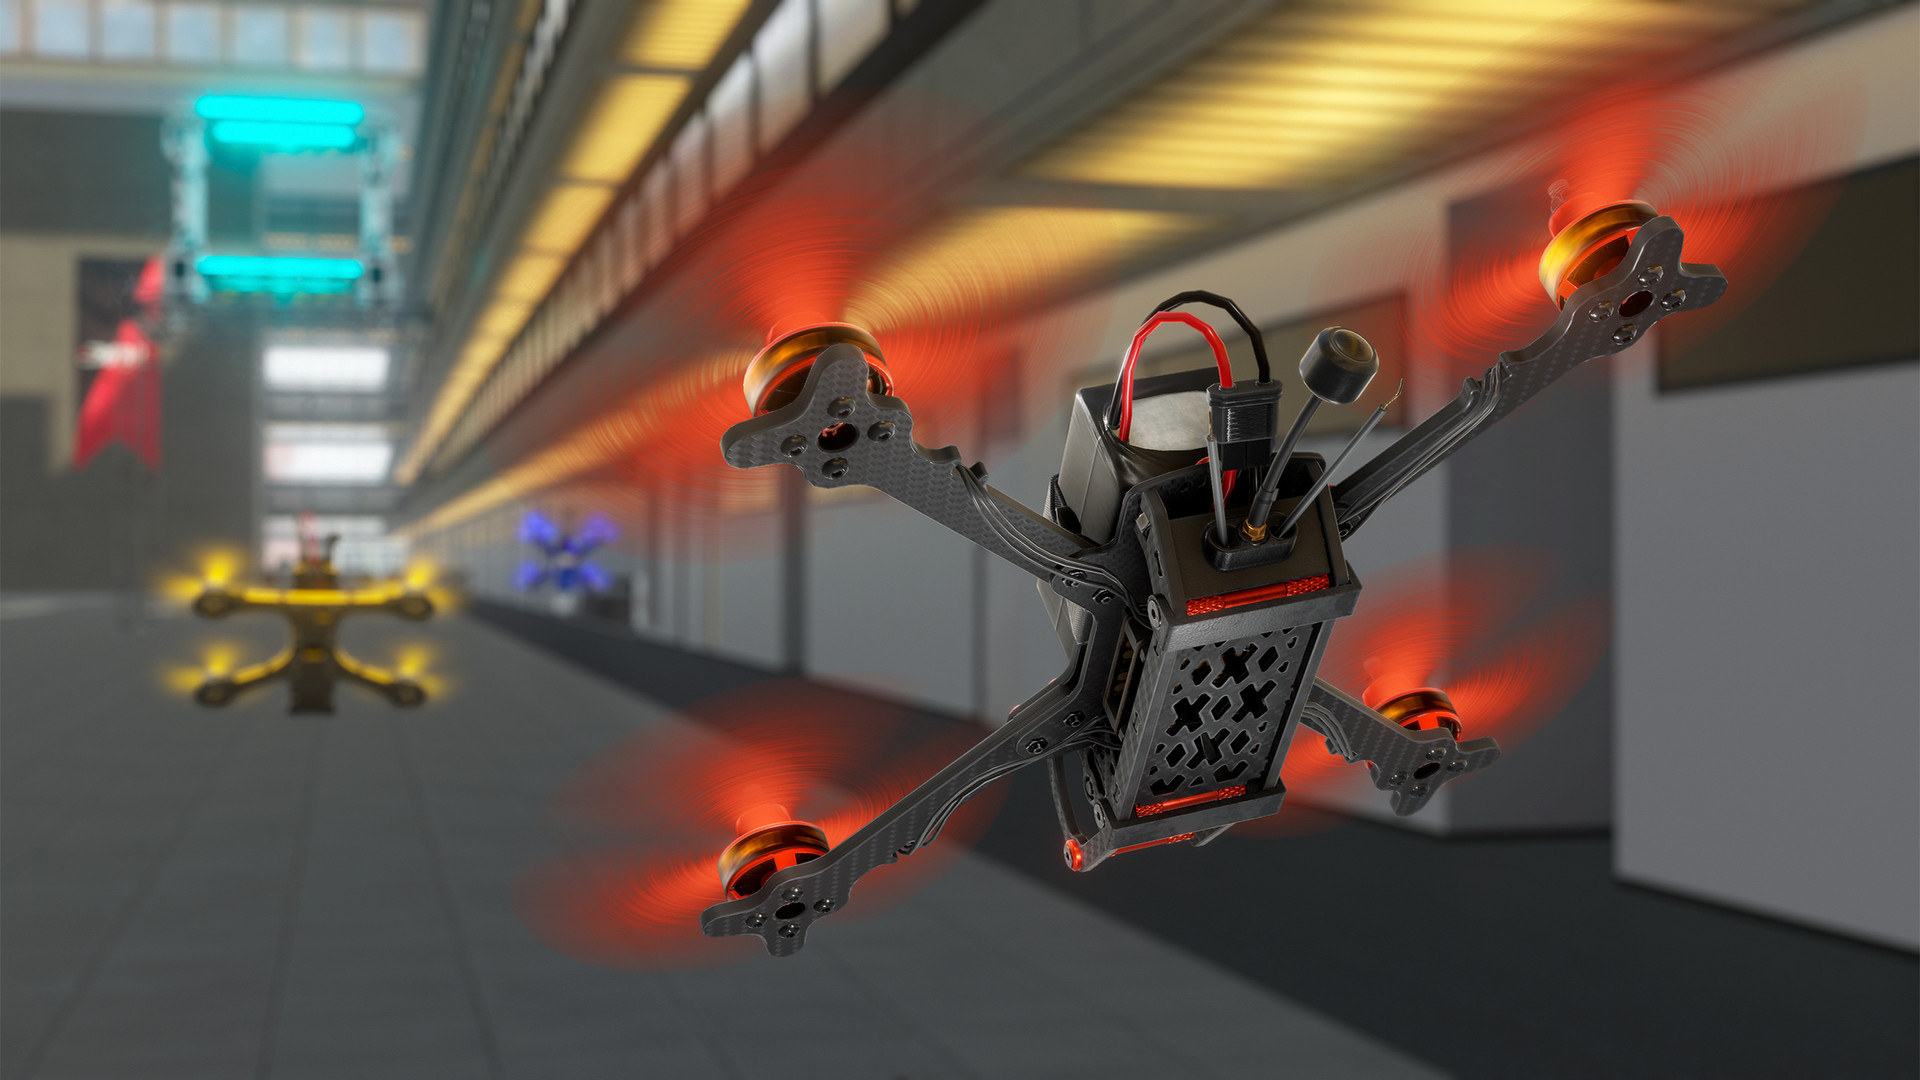 The Drone Racing League Simulator on Steam